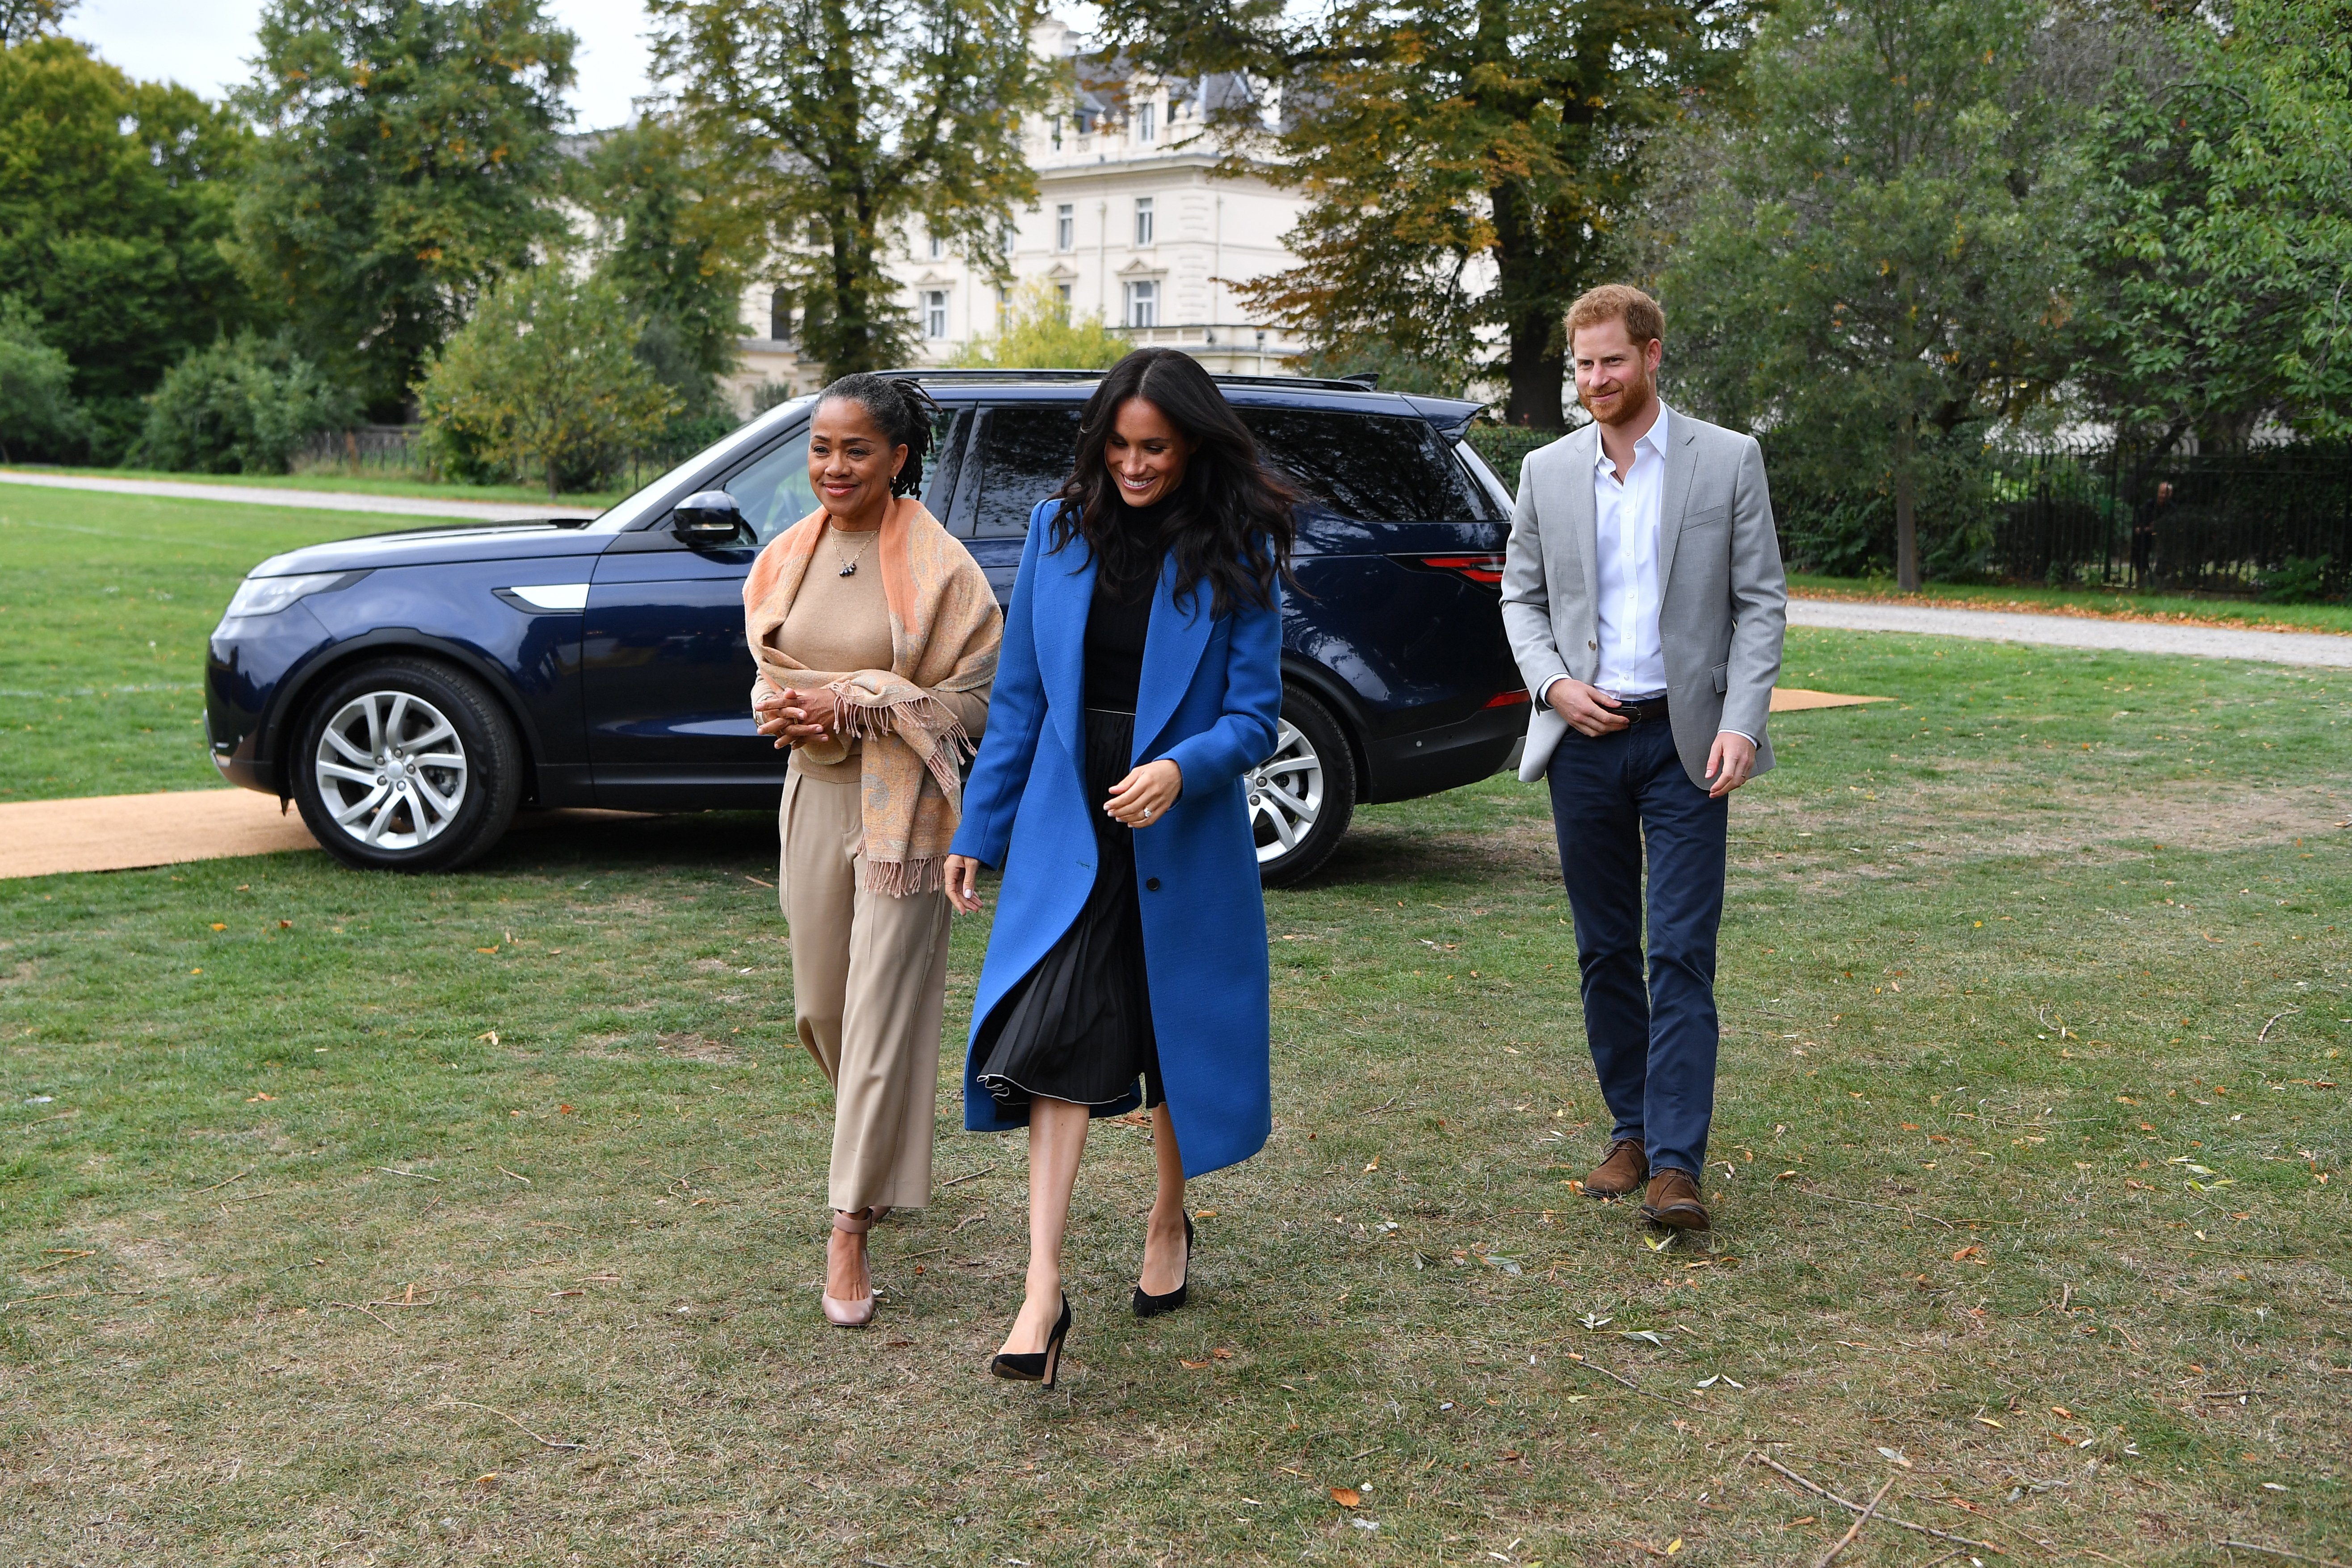 Doria Ragland arriving with her daughter Meghan Markle and son-in-law Prince Harry to host an event at Kensington Palace on September 20, 2018 in London, England ┃Source: Getty Images